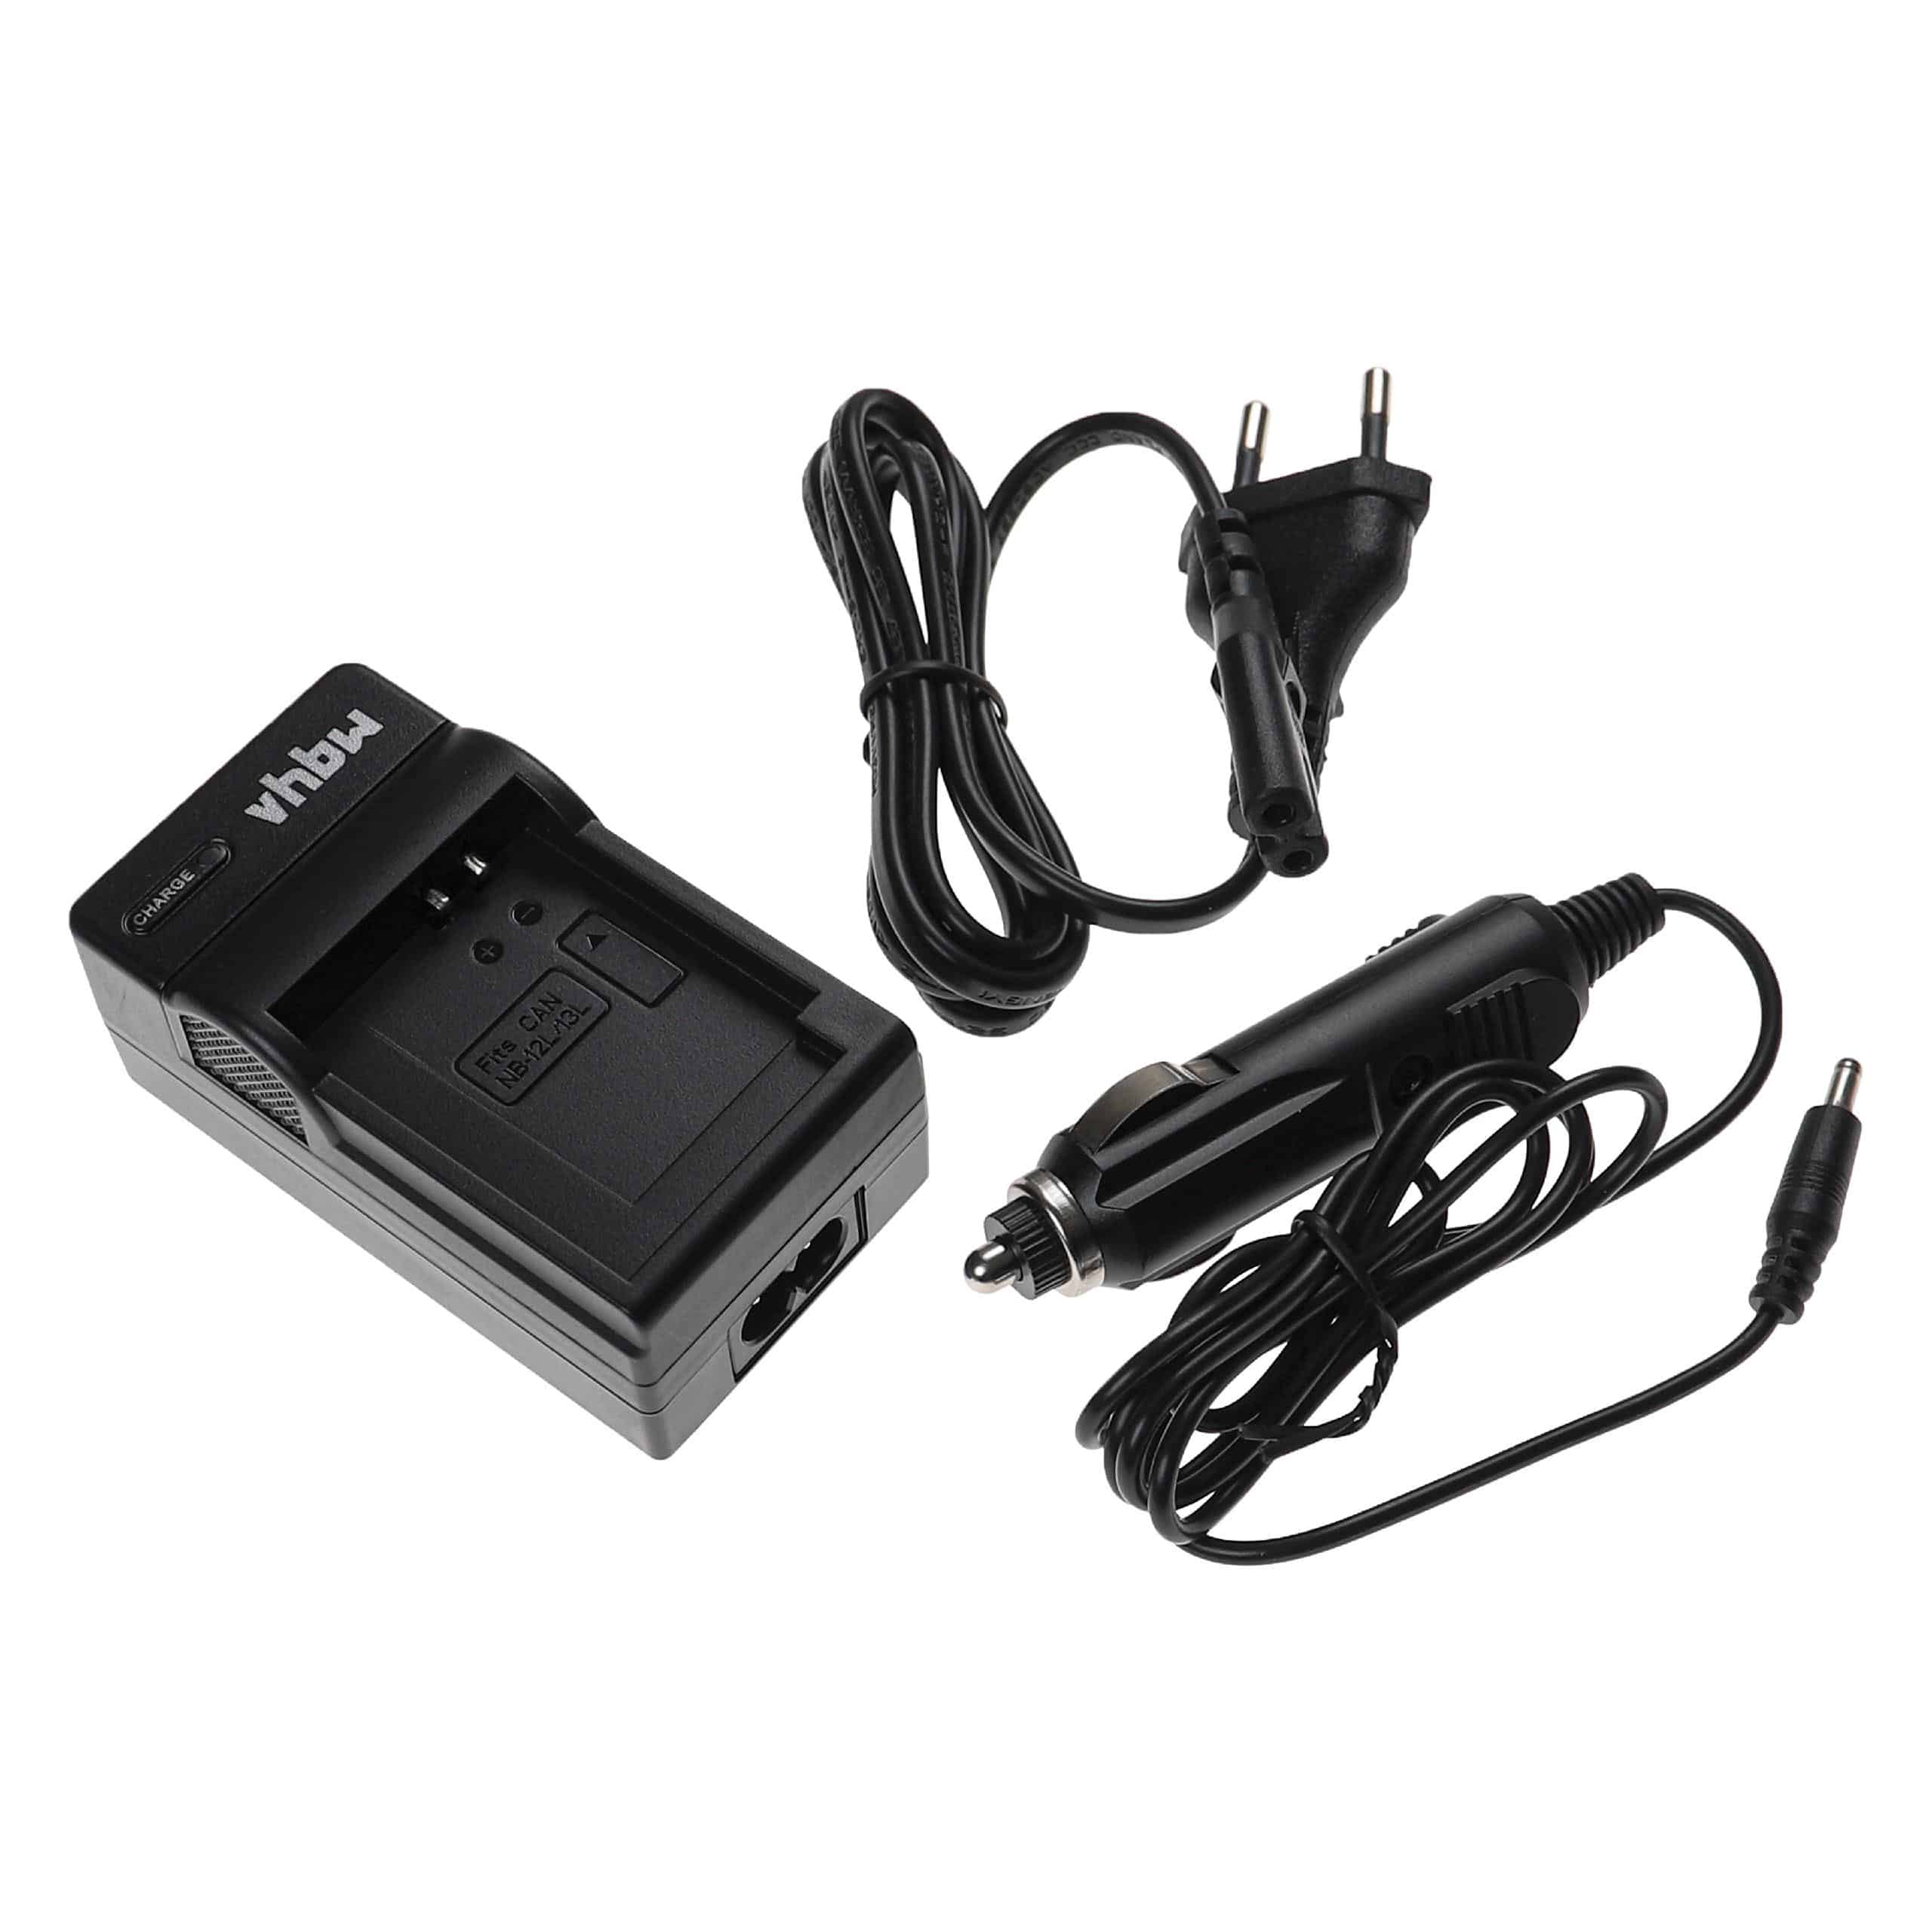 Battery Charger replaces Canon CB-2LHE suitable for Canon NB-12L Camera etc. 